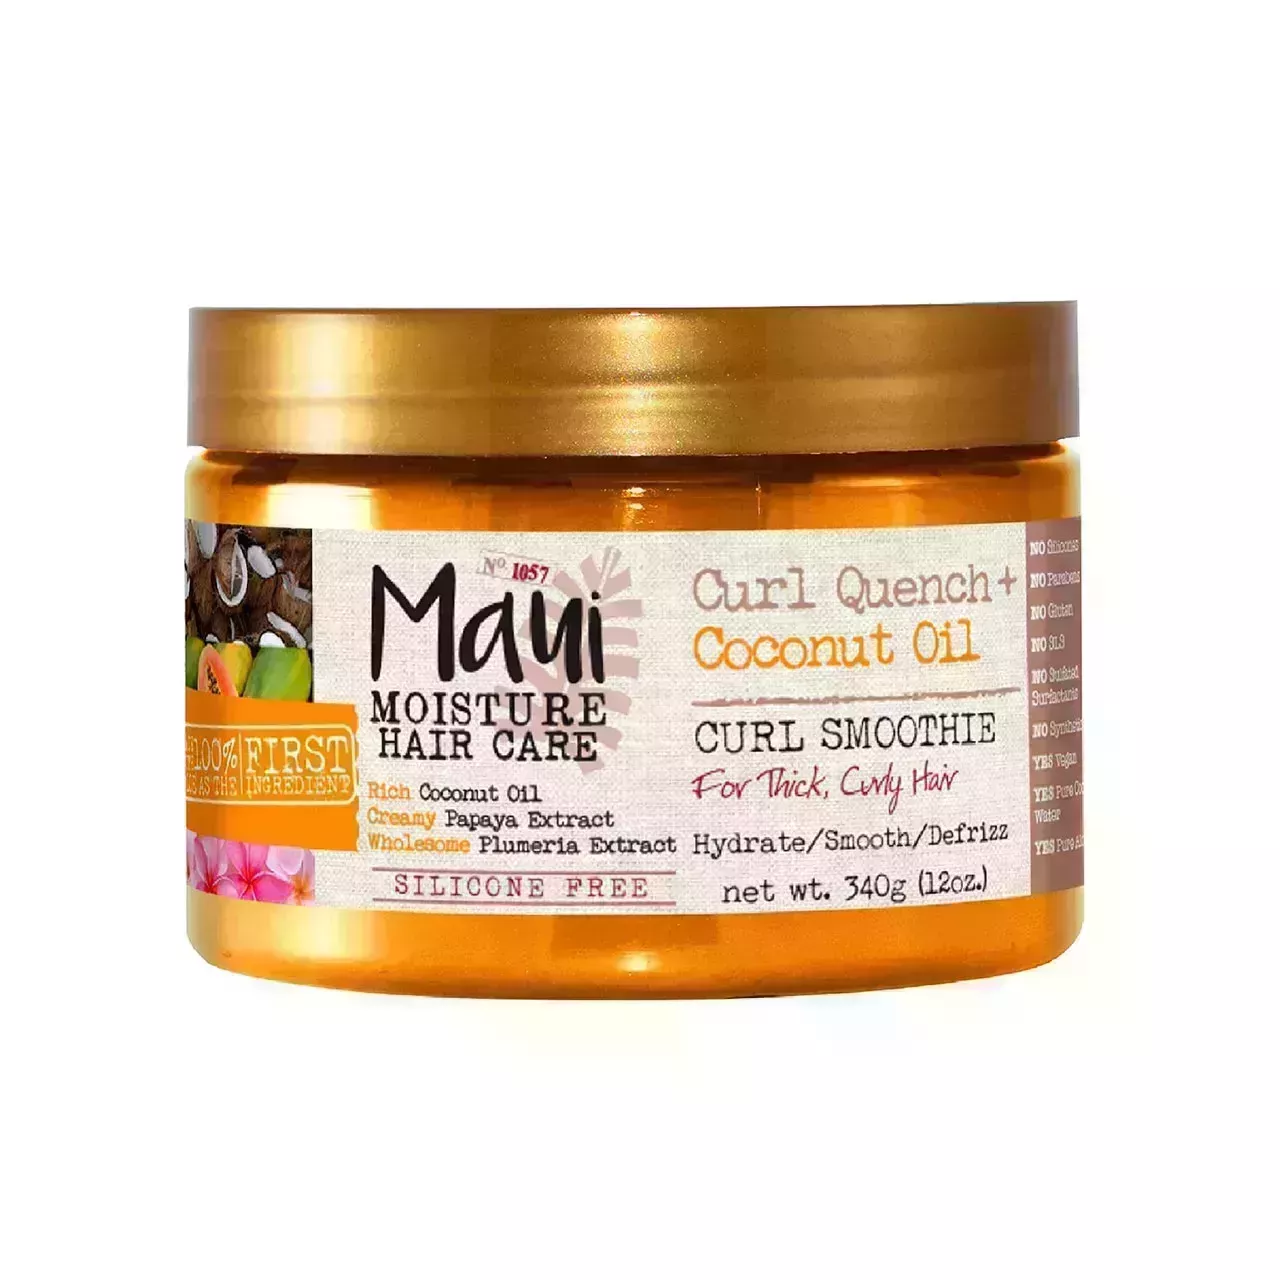 Maui Moisture Curl Quench Coconut Oil Curl Smoothie orange jar with gold lid on white background